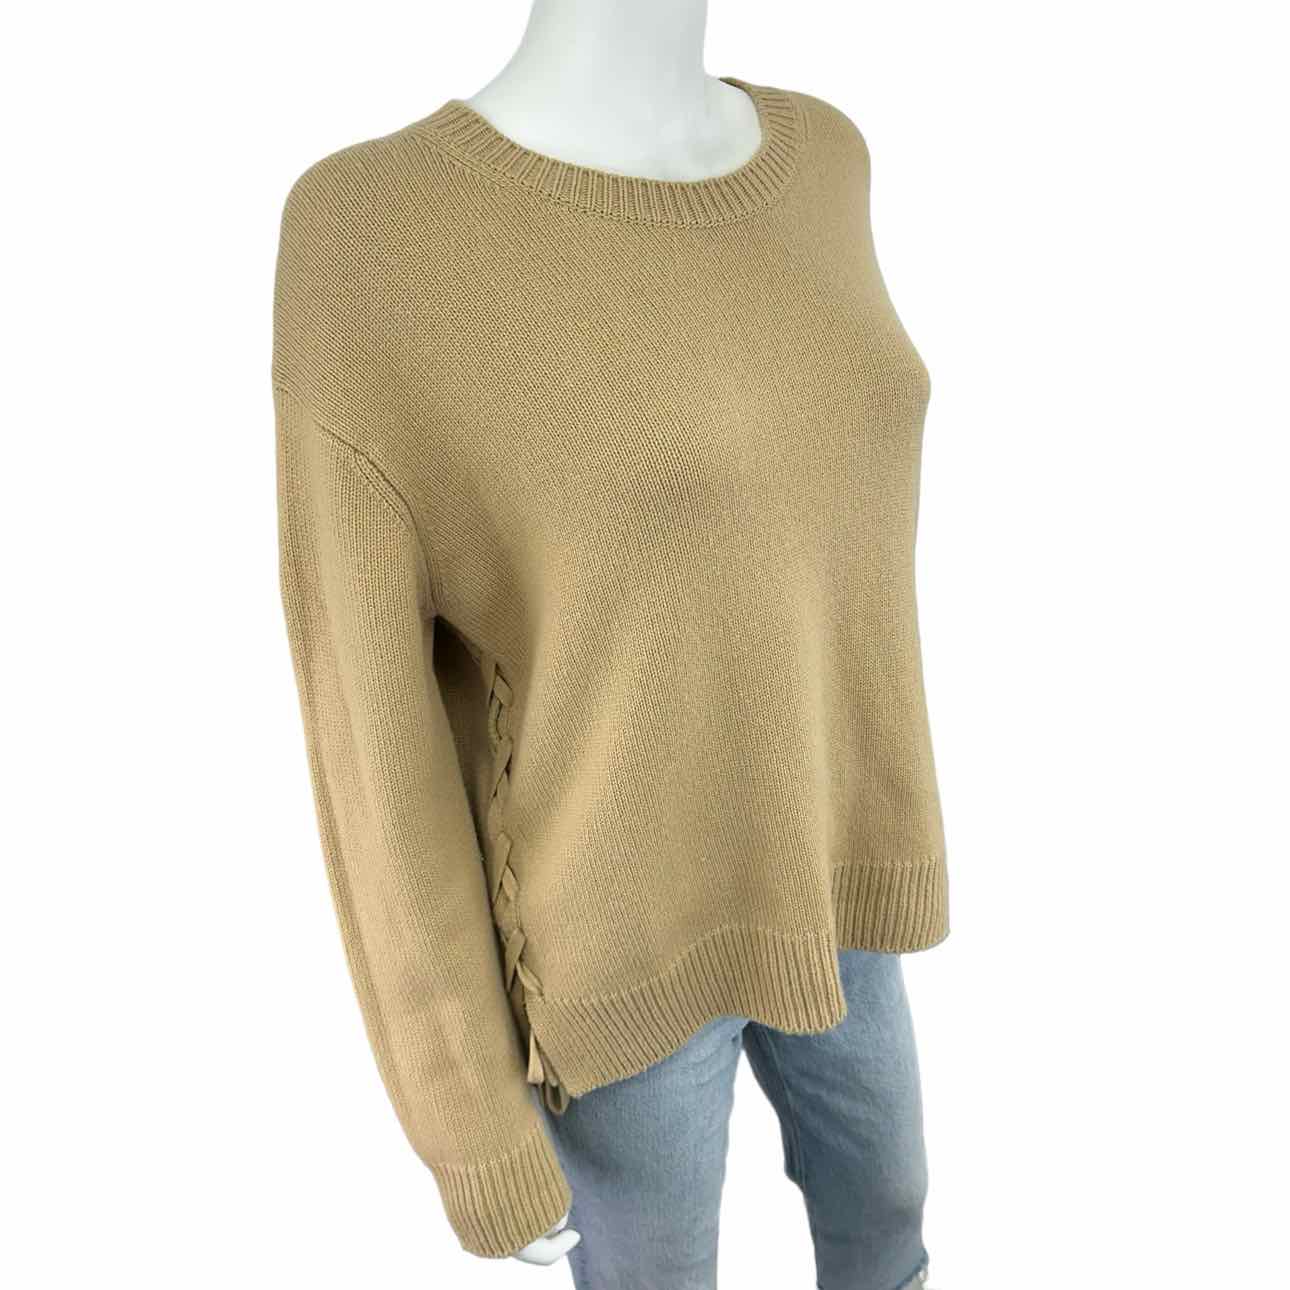 vince. Tan 100% Cashmere Sweater Size S